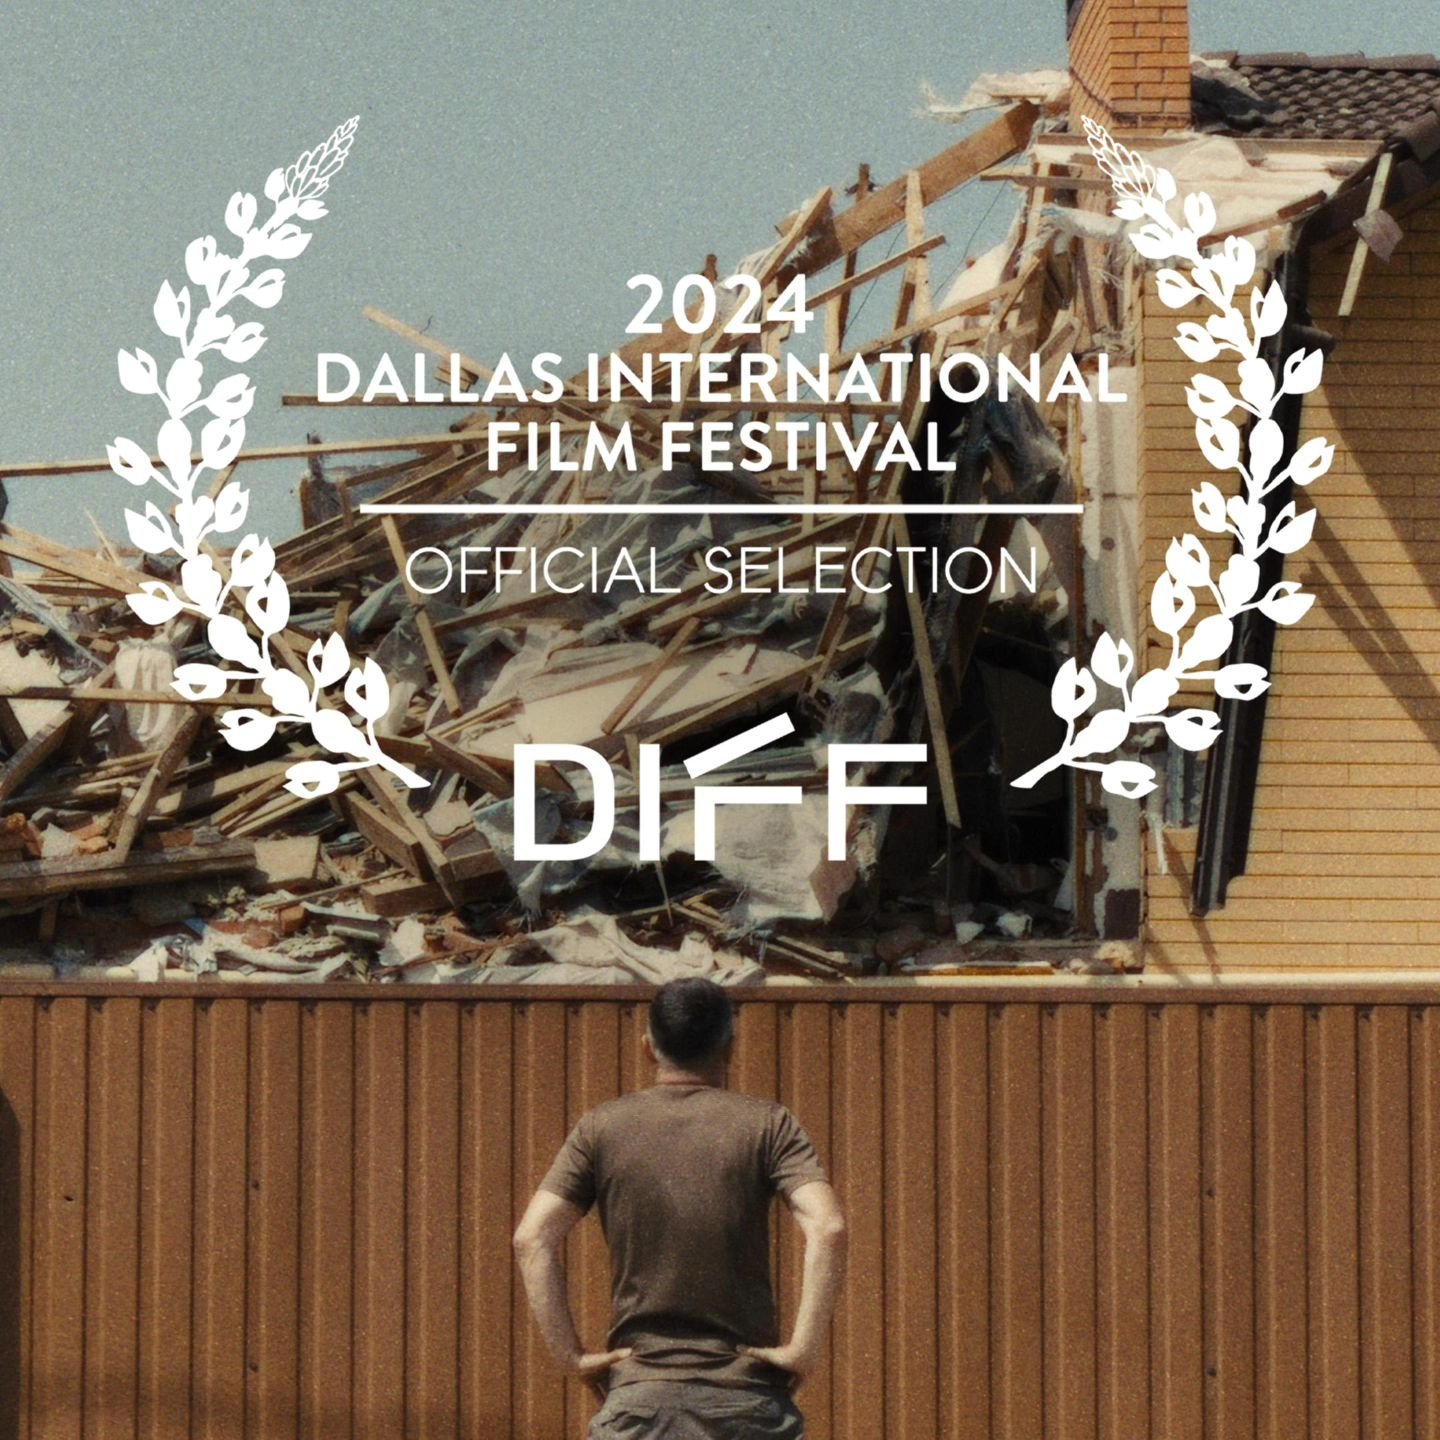 Join us for our Texas Premiere at the Dallas International Film Festival! 

Screenings:
April 27 @ 2:15pm
April 29 @ 1:00pm

@dallasiff #porcelainwar